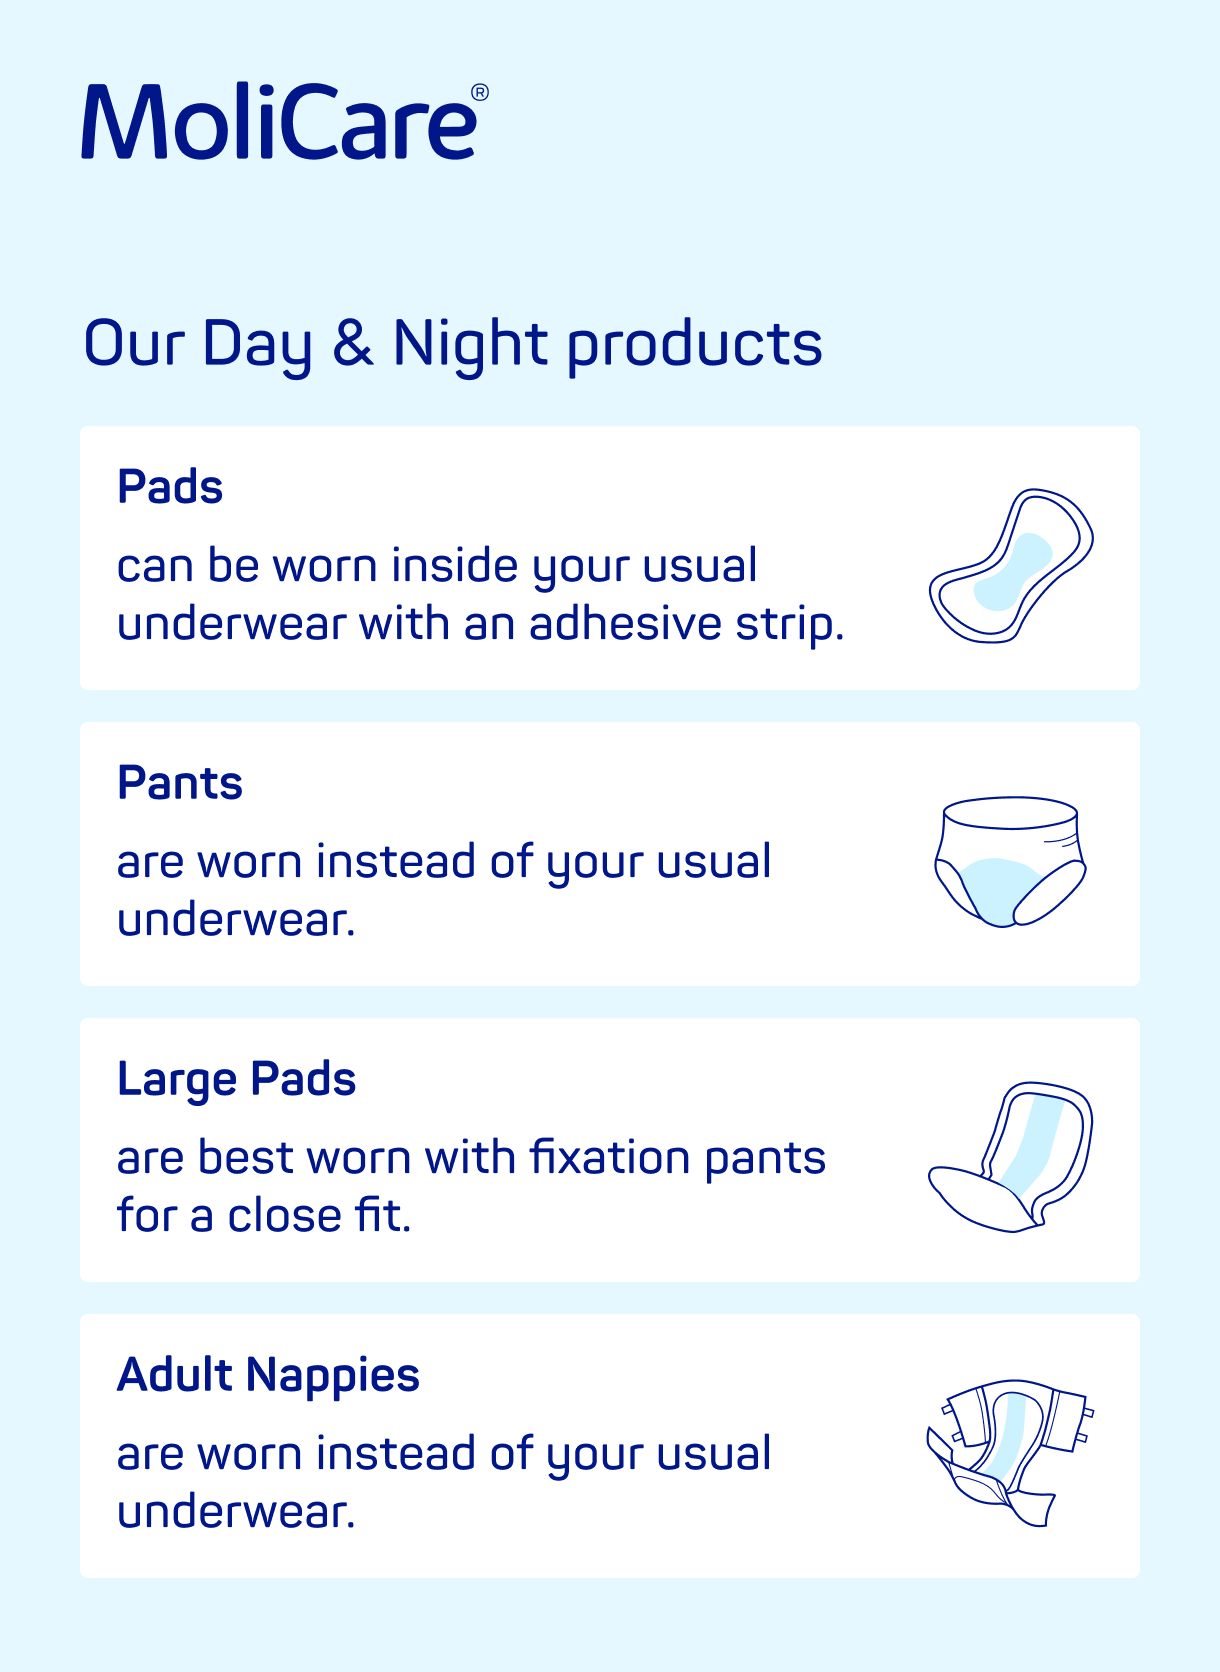 Illustration: MoliCare® Day & Night products with 4 product categories as an overview.